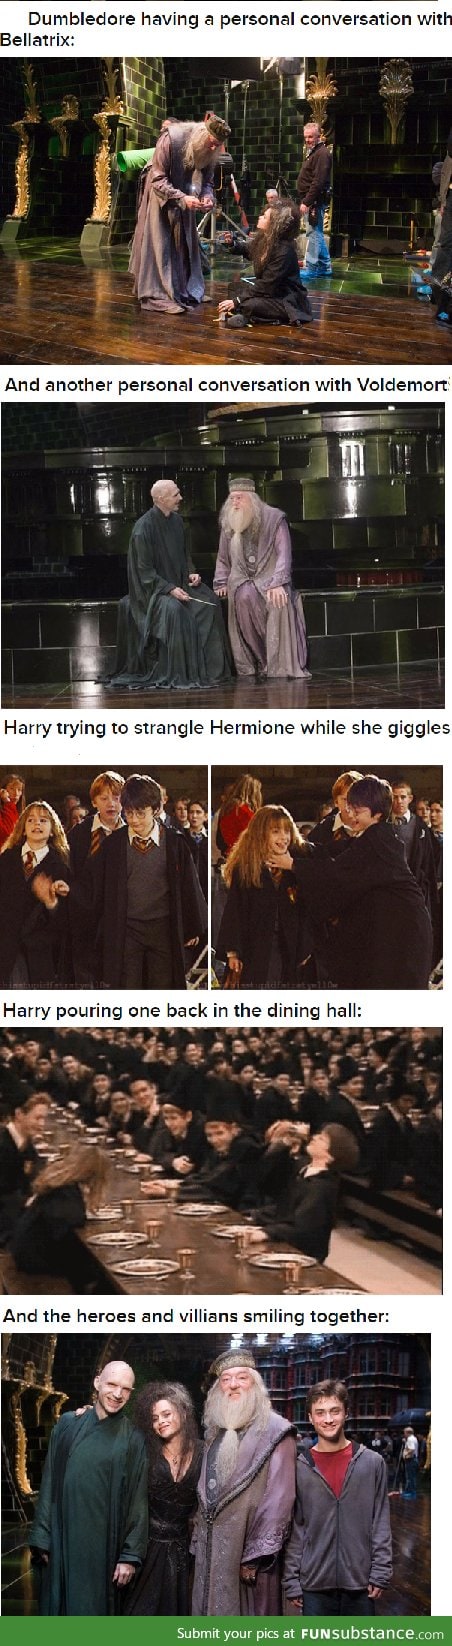 Things you won't see on Harry Potter part 1